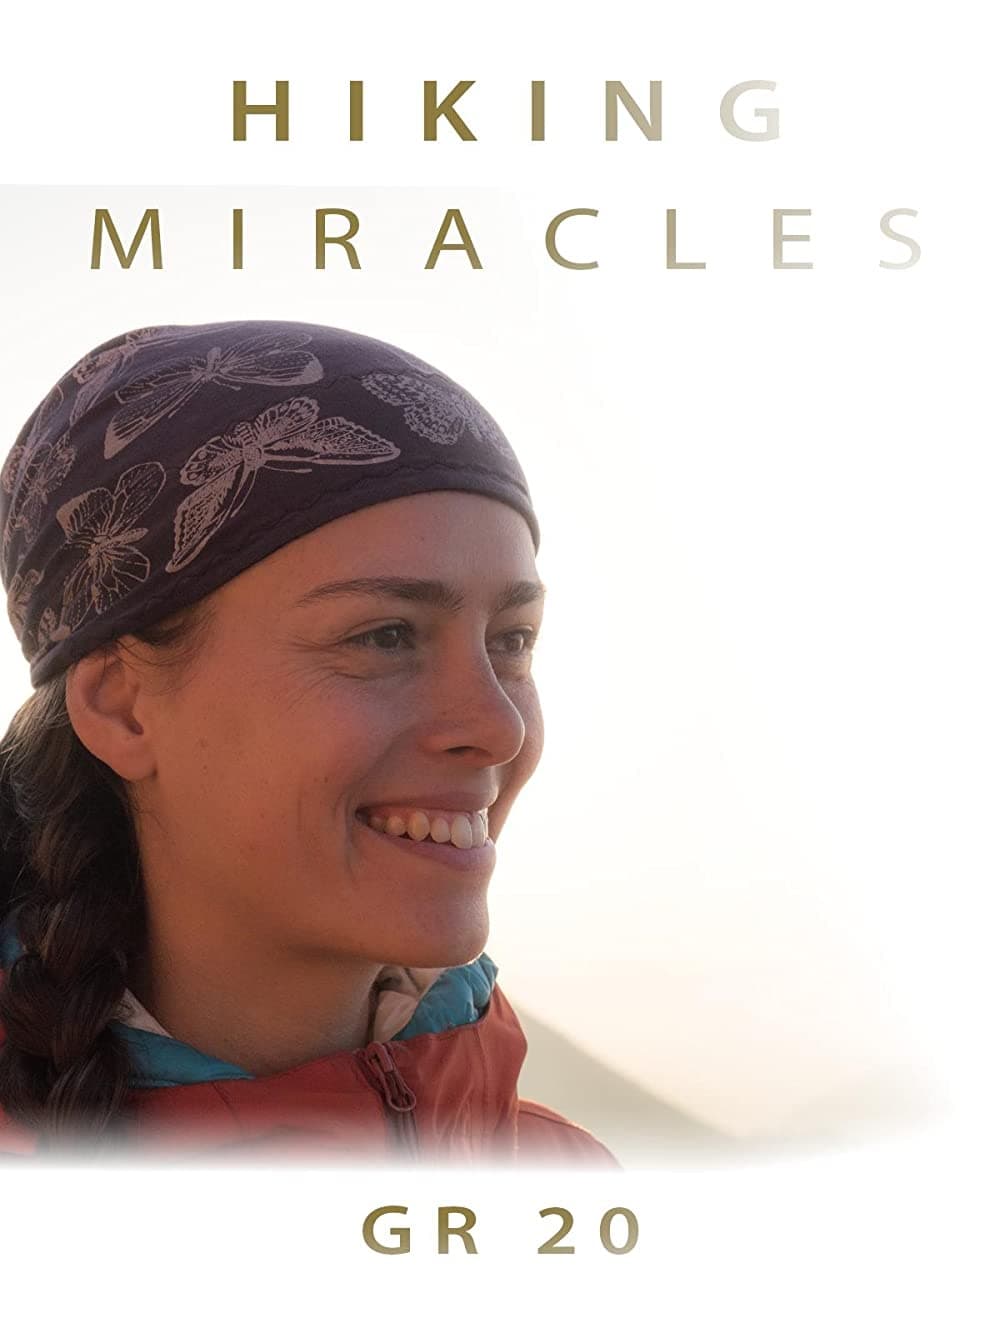 Hiking Miracles: GR 20